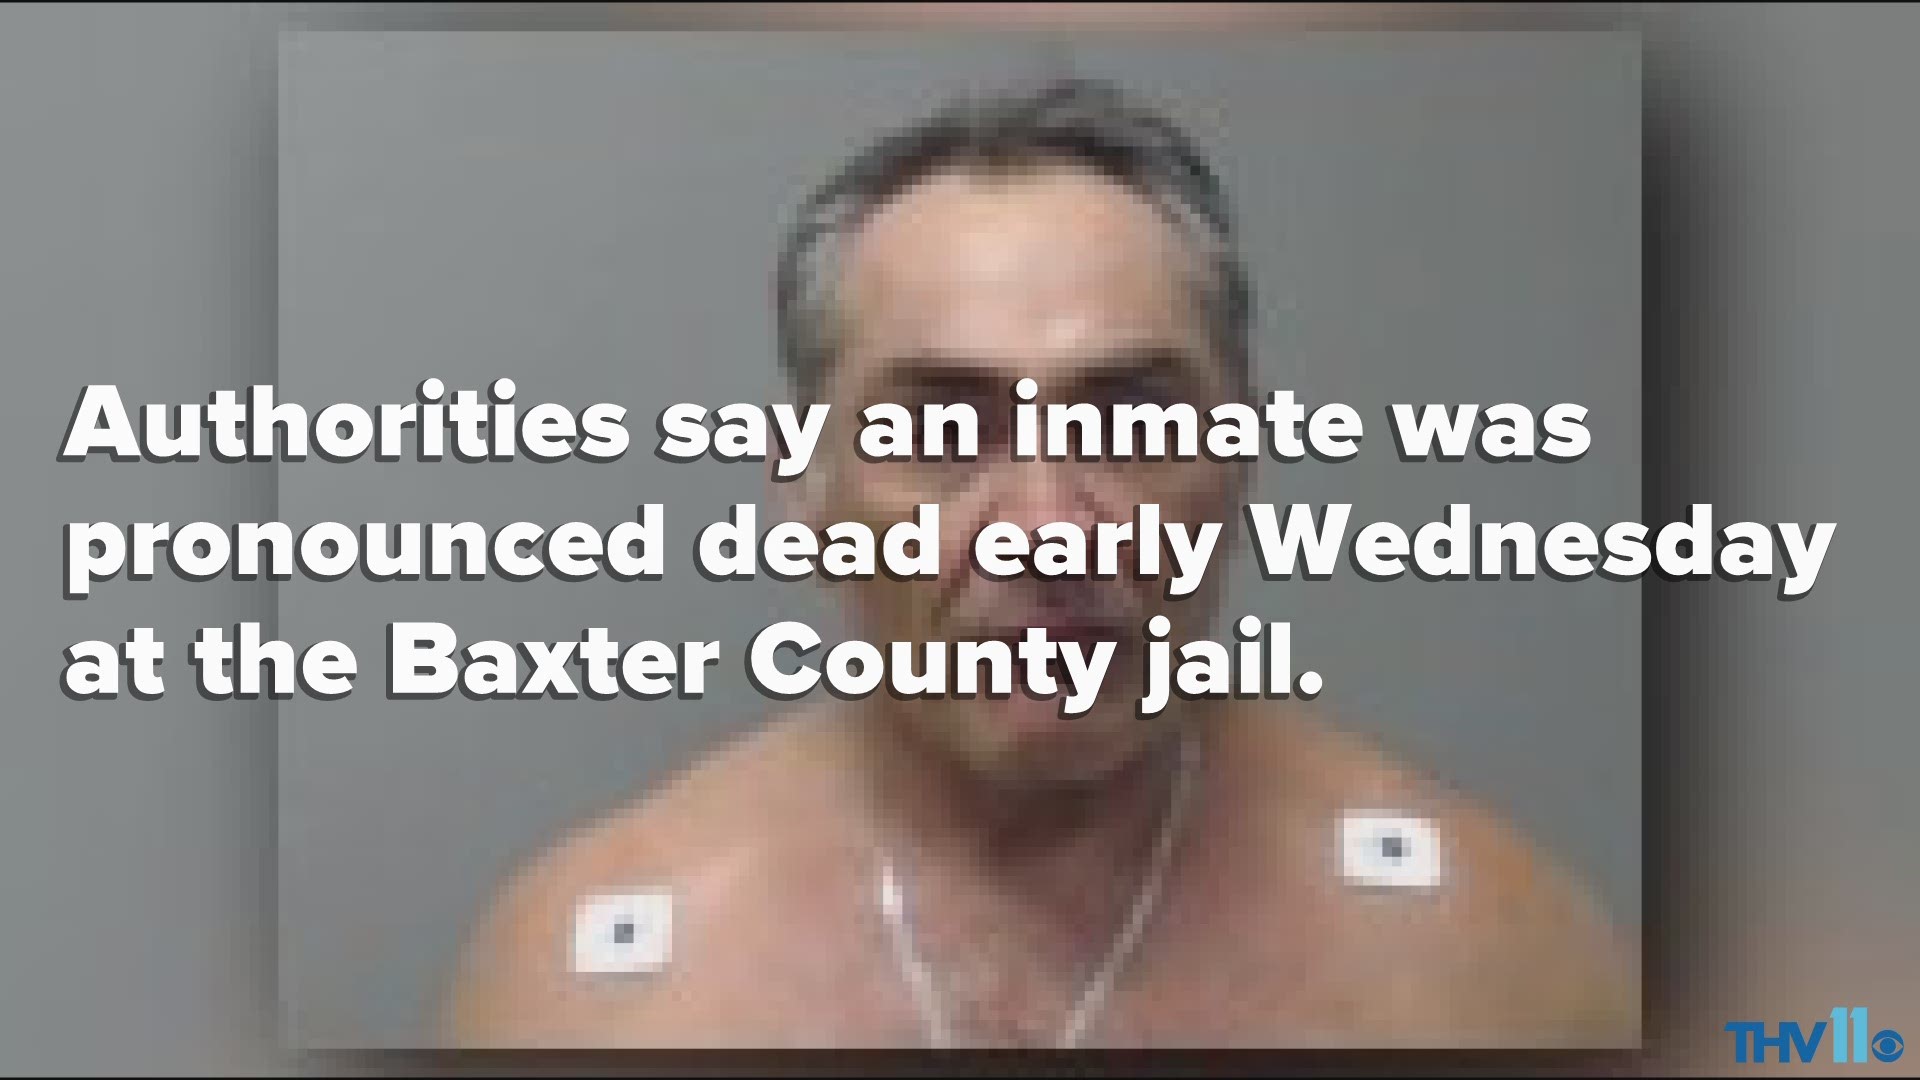 53yearold inmate found dead in Baxter County jail after prior day